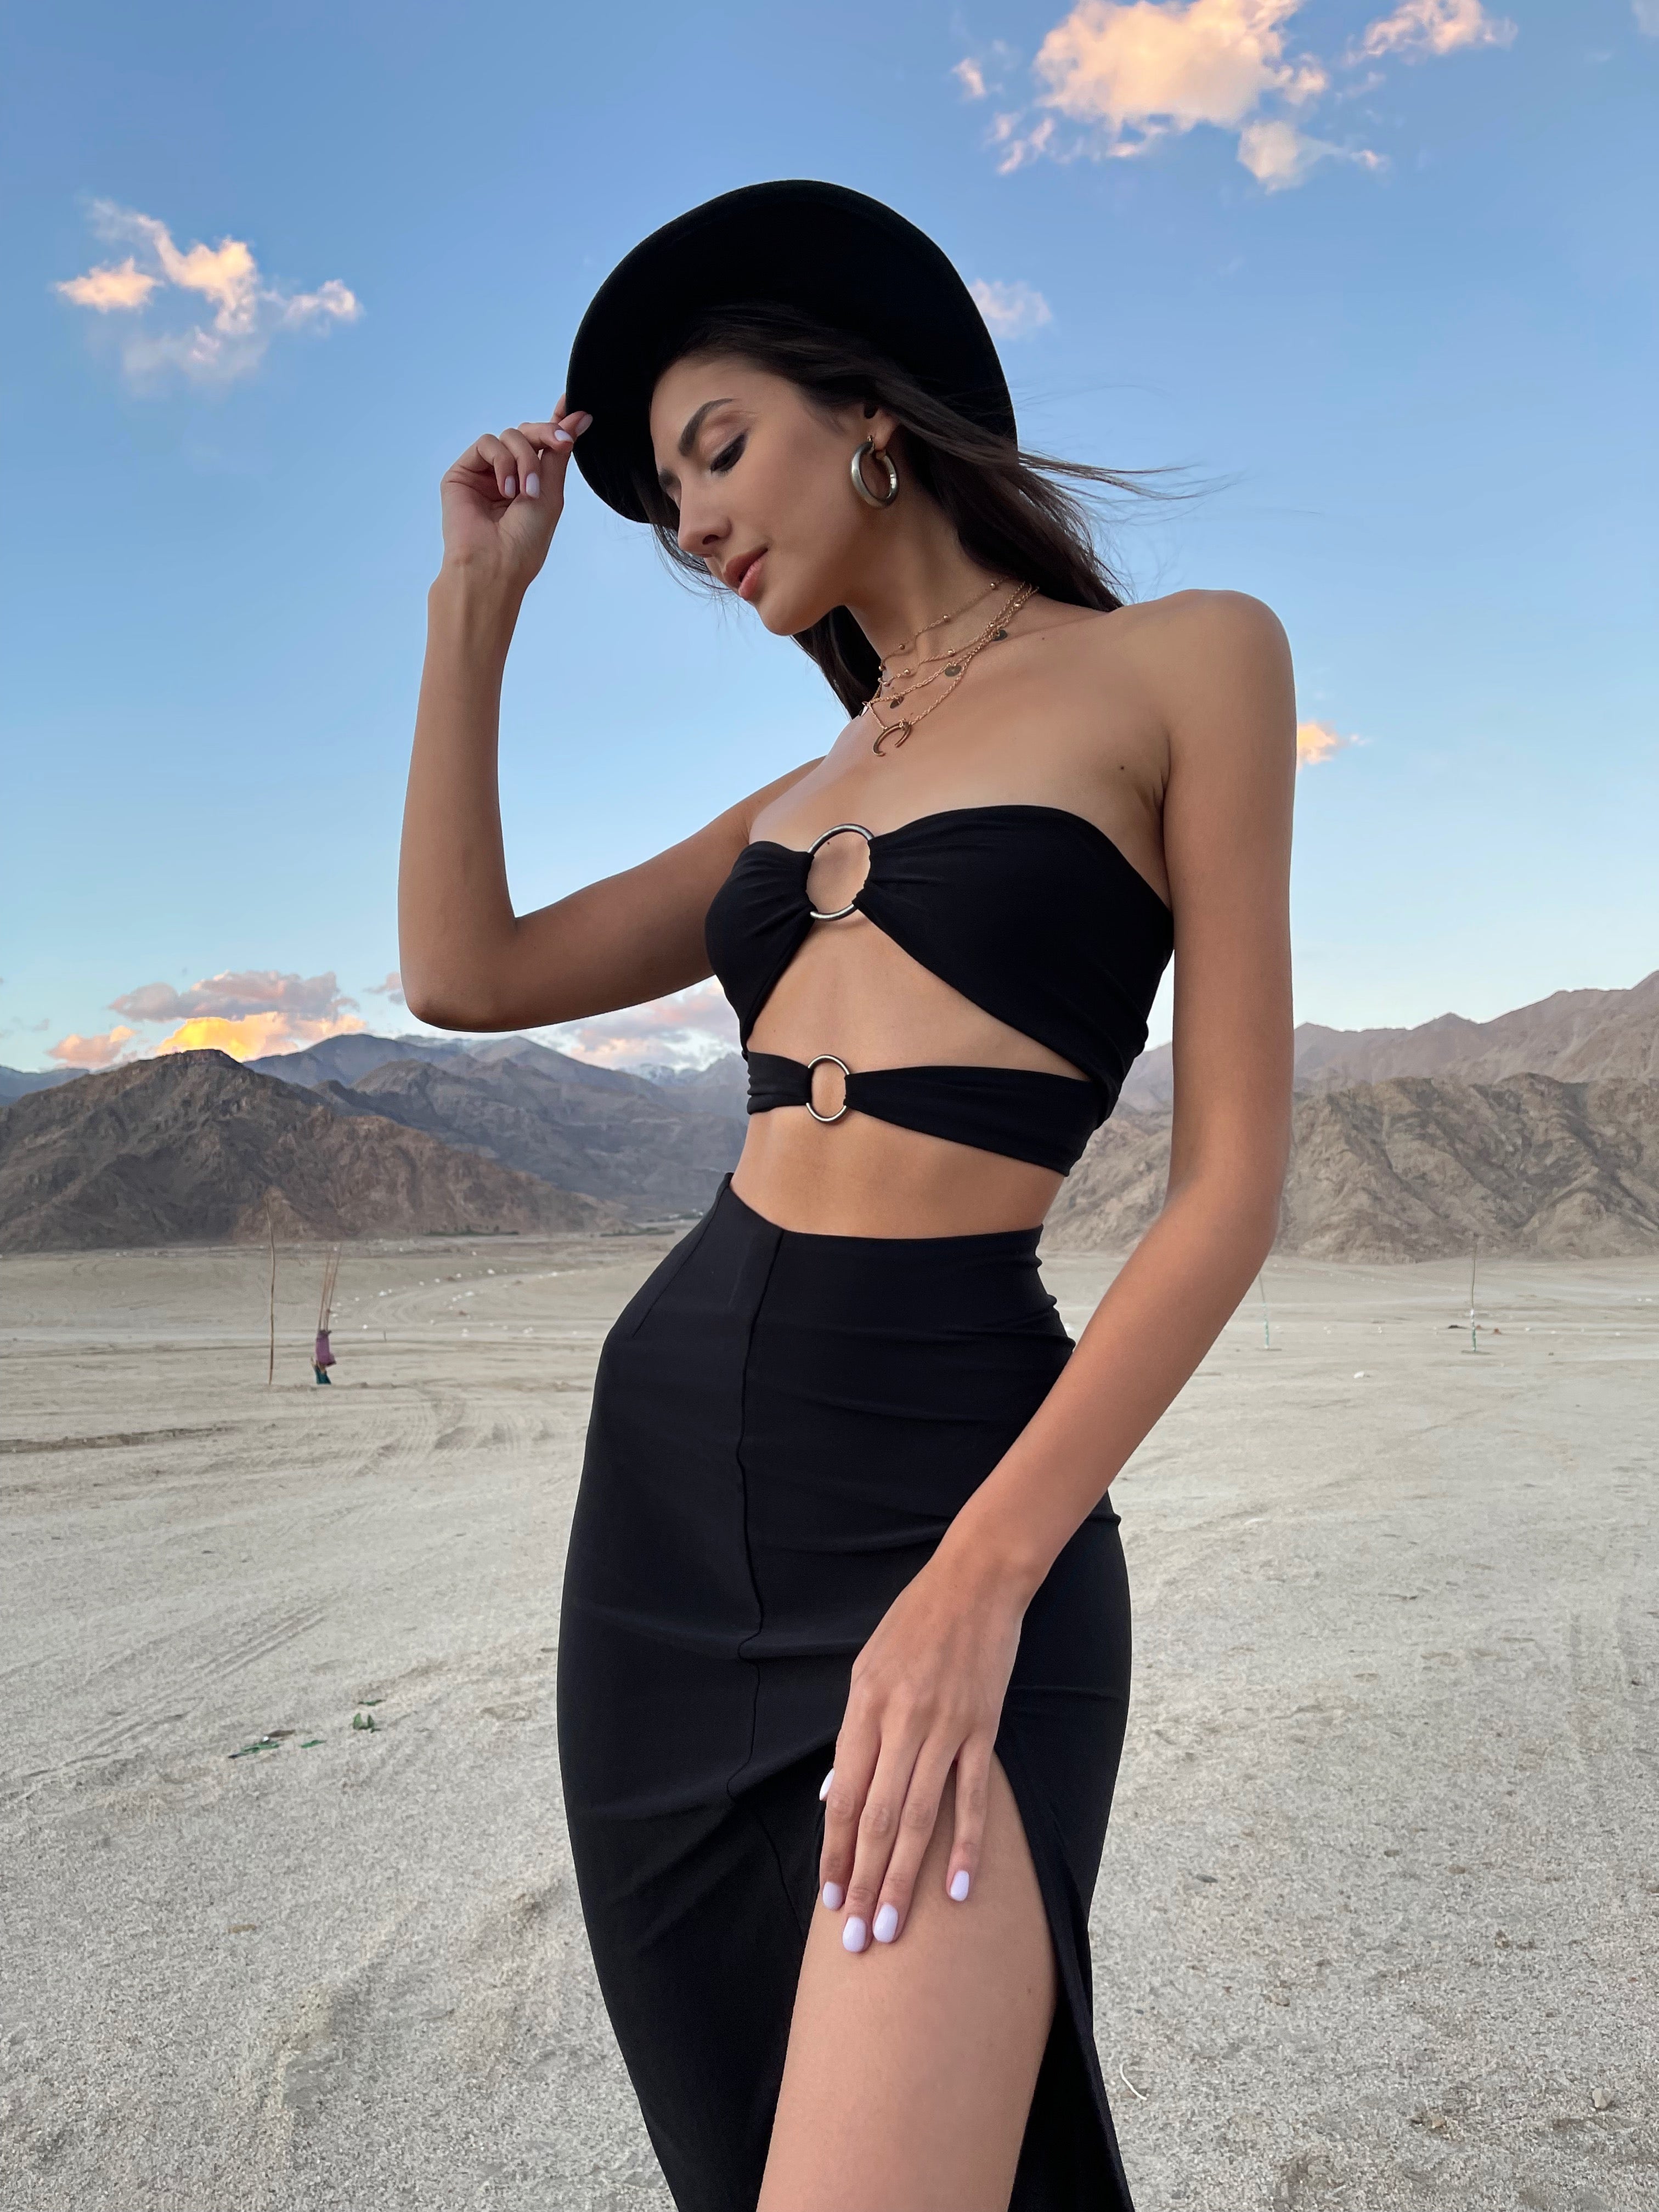 Buckle bustier with slit skirt